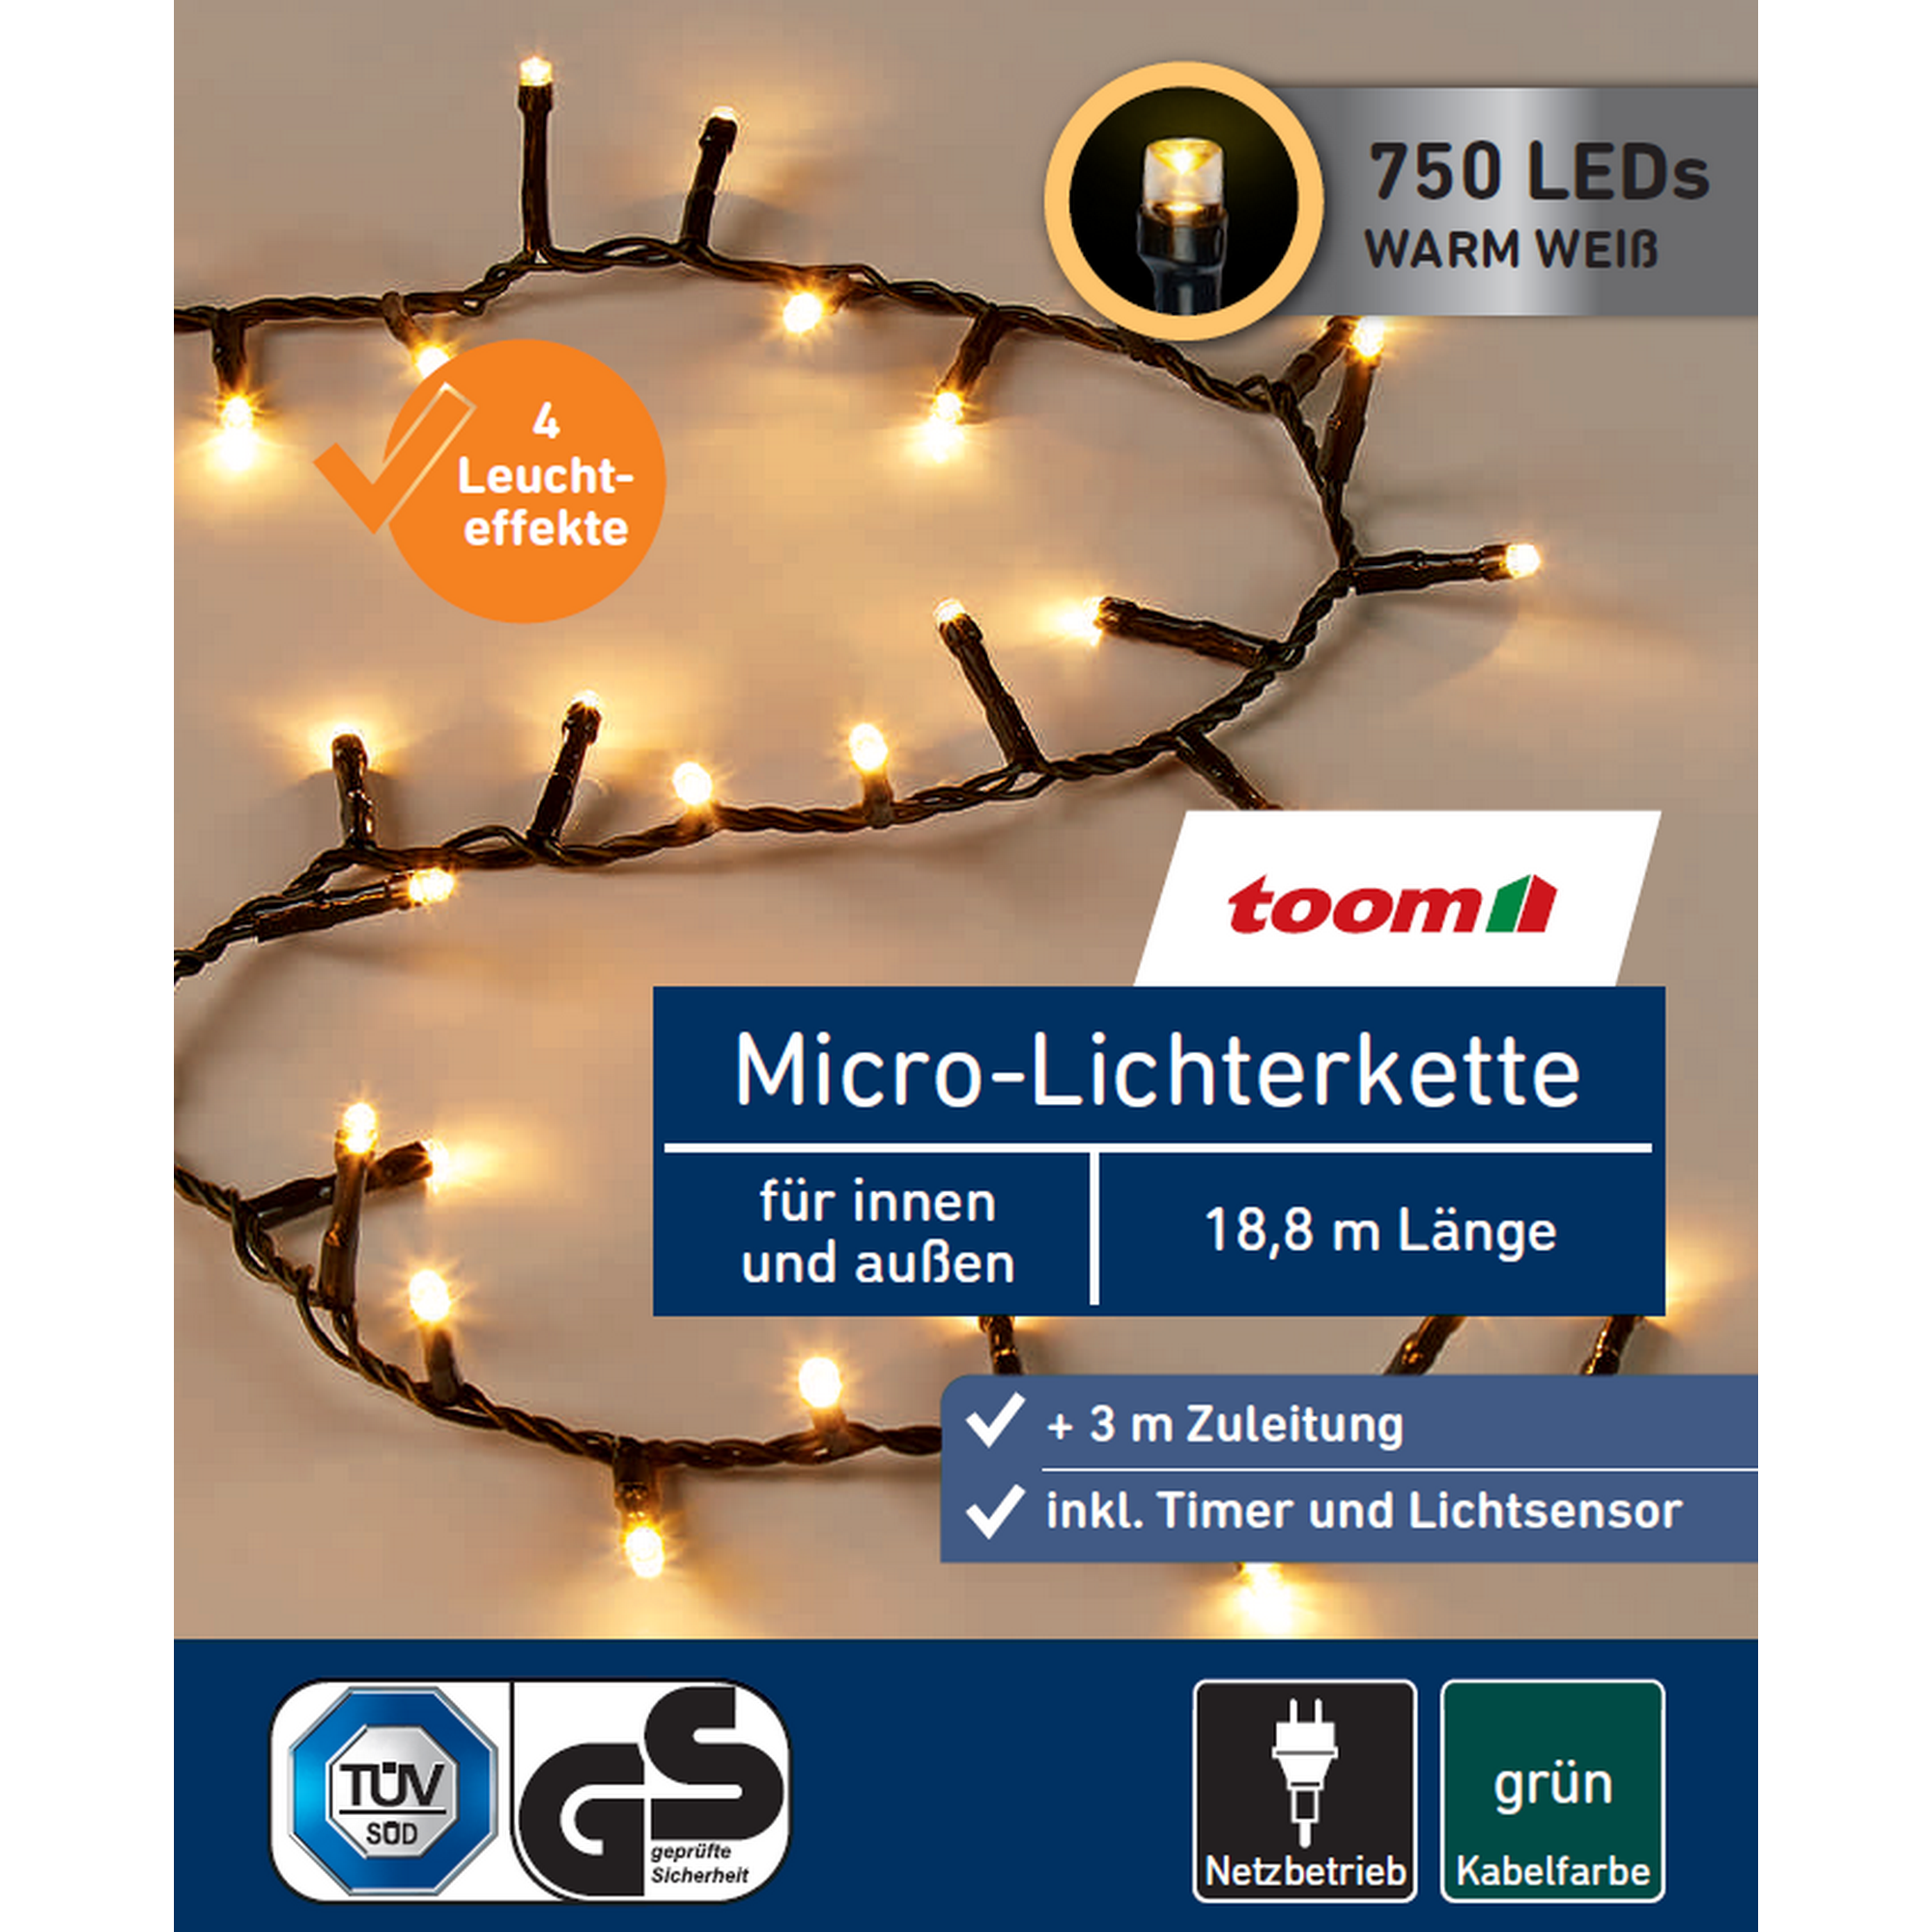 LED-Micro-Lichterkette 750 LEDs warmweiß 1880 cm + product picture